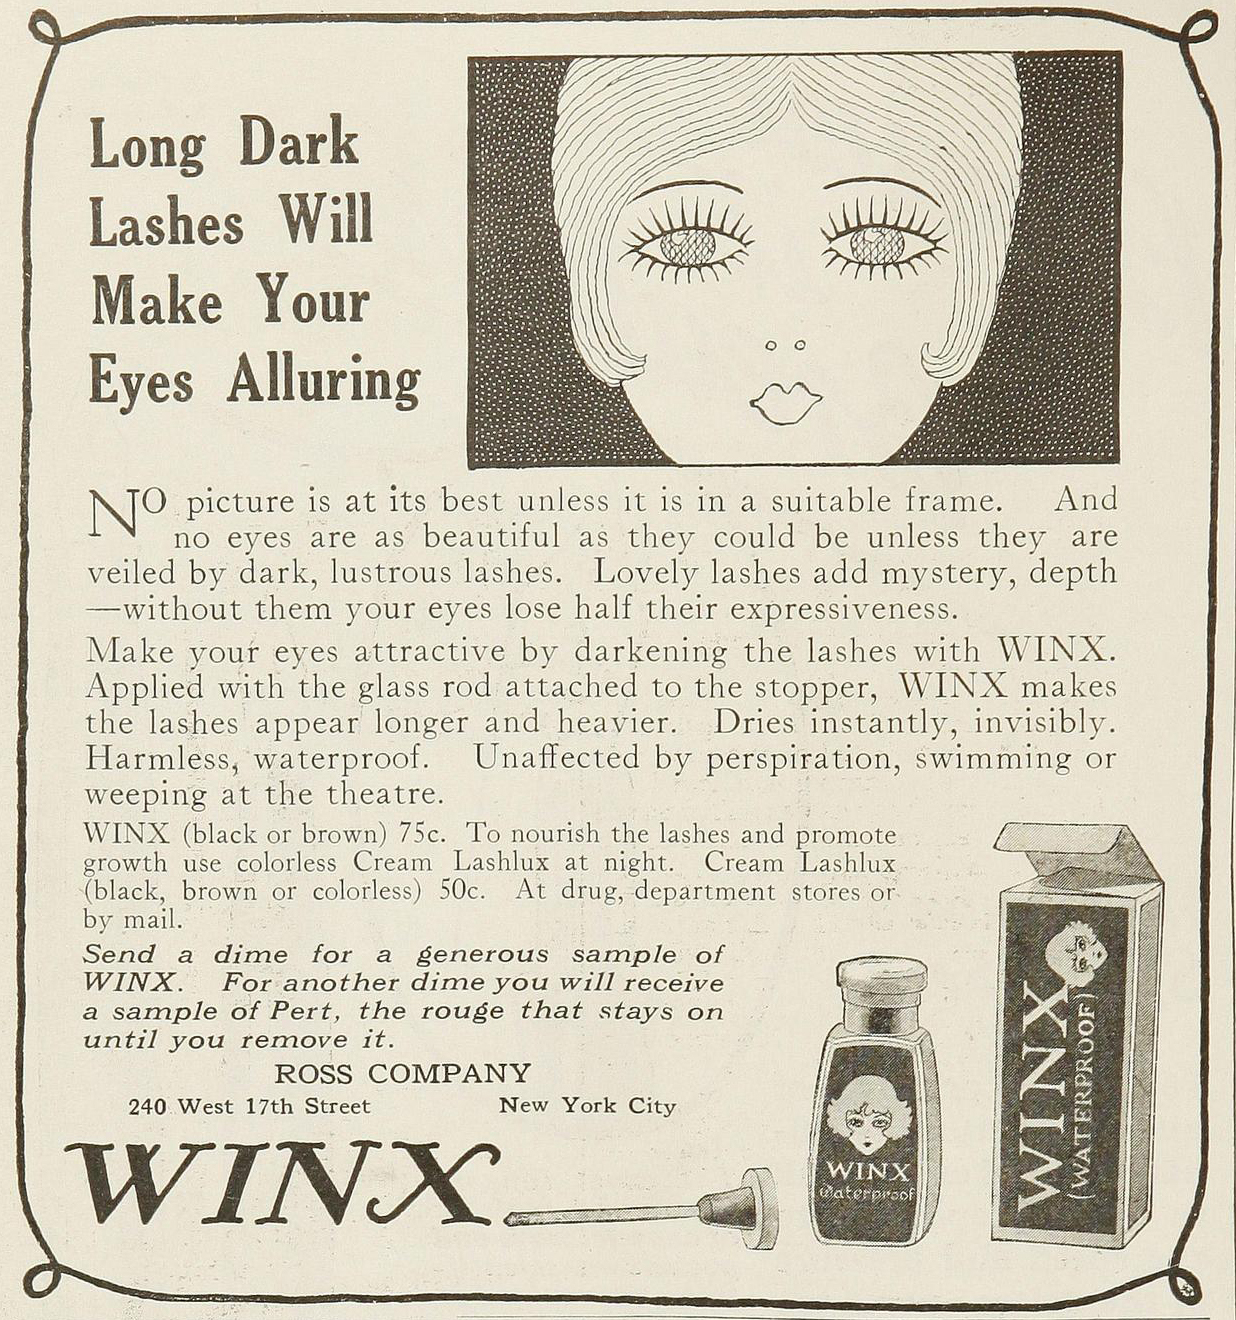 A 1924 advertisement for Winx Cosmetics with the heading, Long Dark Lashes Will Make Your Eyes Alluring, a drawing of the face of a young woman with long lashes, text and an image of the product